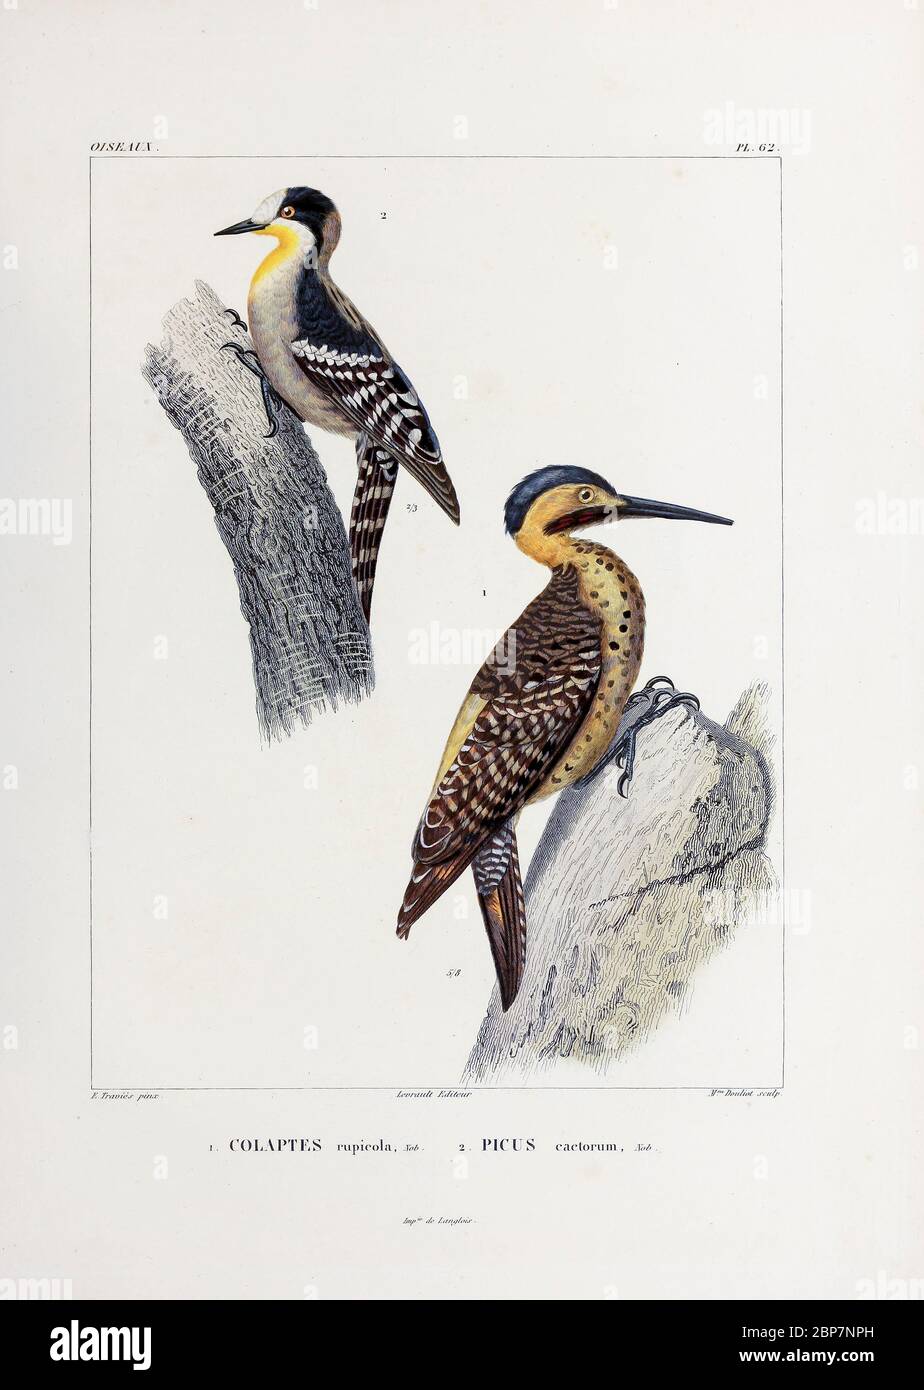 hand coloured sketch Top: white-fronted woodpecker (Melanerpes cactorum)[Here as Picus cactorum]) Bottom: Andean flicker (Colaptes rupicola) From the book 'Voyage dans l'Amérique Méridionale' [Journey to South America: (Brazil, the eastern republic of Uruguay, the Argentine Republic, Patagonia, the republic of Chile, the republic of Bolivia, the republic of Peru), executed during the years 1826 - 1833] 4th volume Part 3 By: Orbigny, Alcide Dessalines d', d'Orbigny, 1802-1857; Montagne, Jean François Camille, 1784-1866; Martius, Karl Friedrich Philipp von, 1794-1868 Published Paris :Chez Pitoi Stock Photo